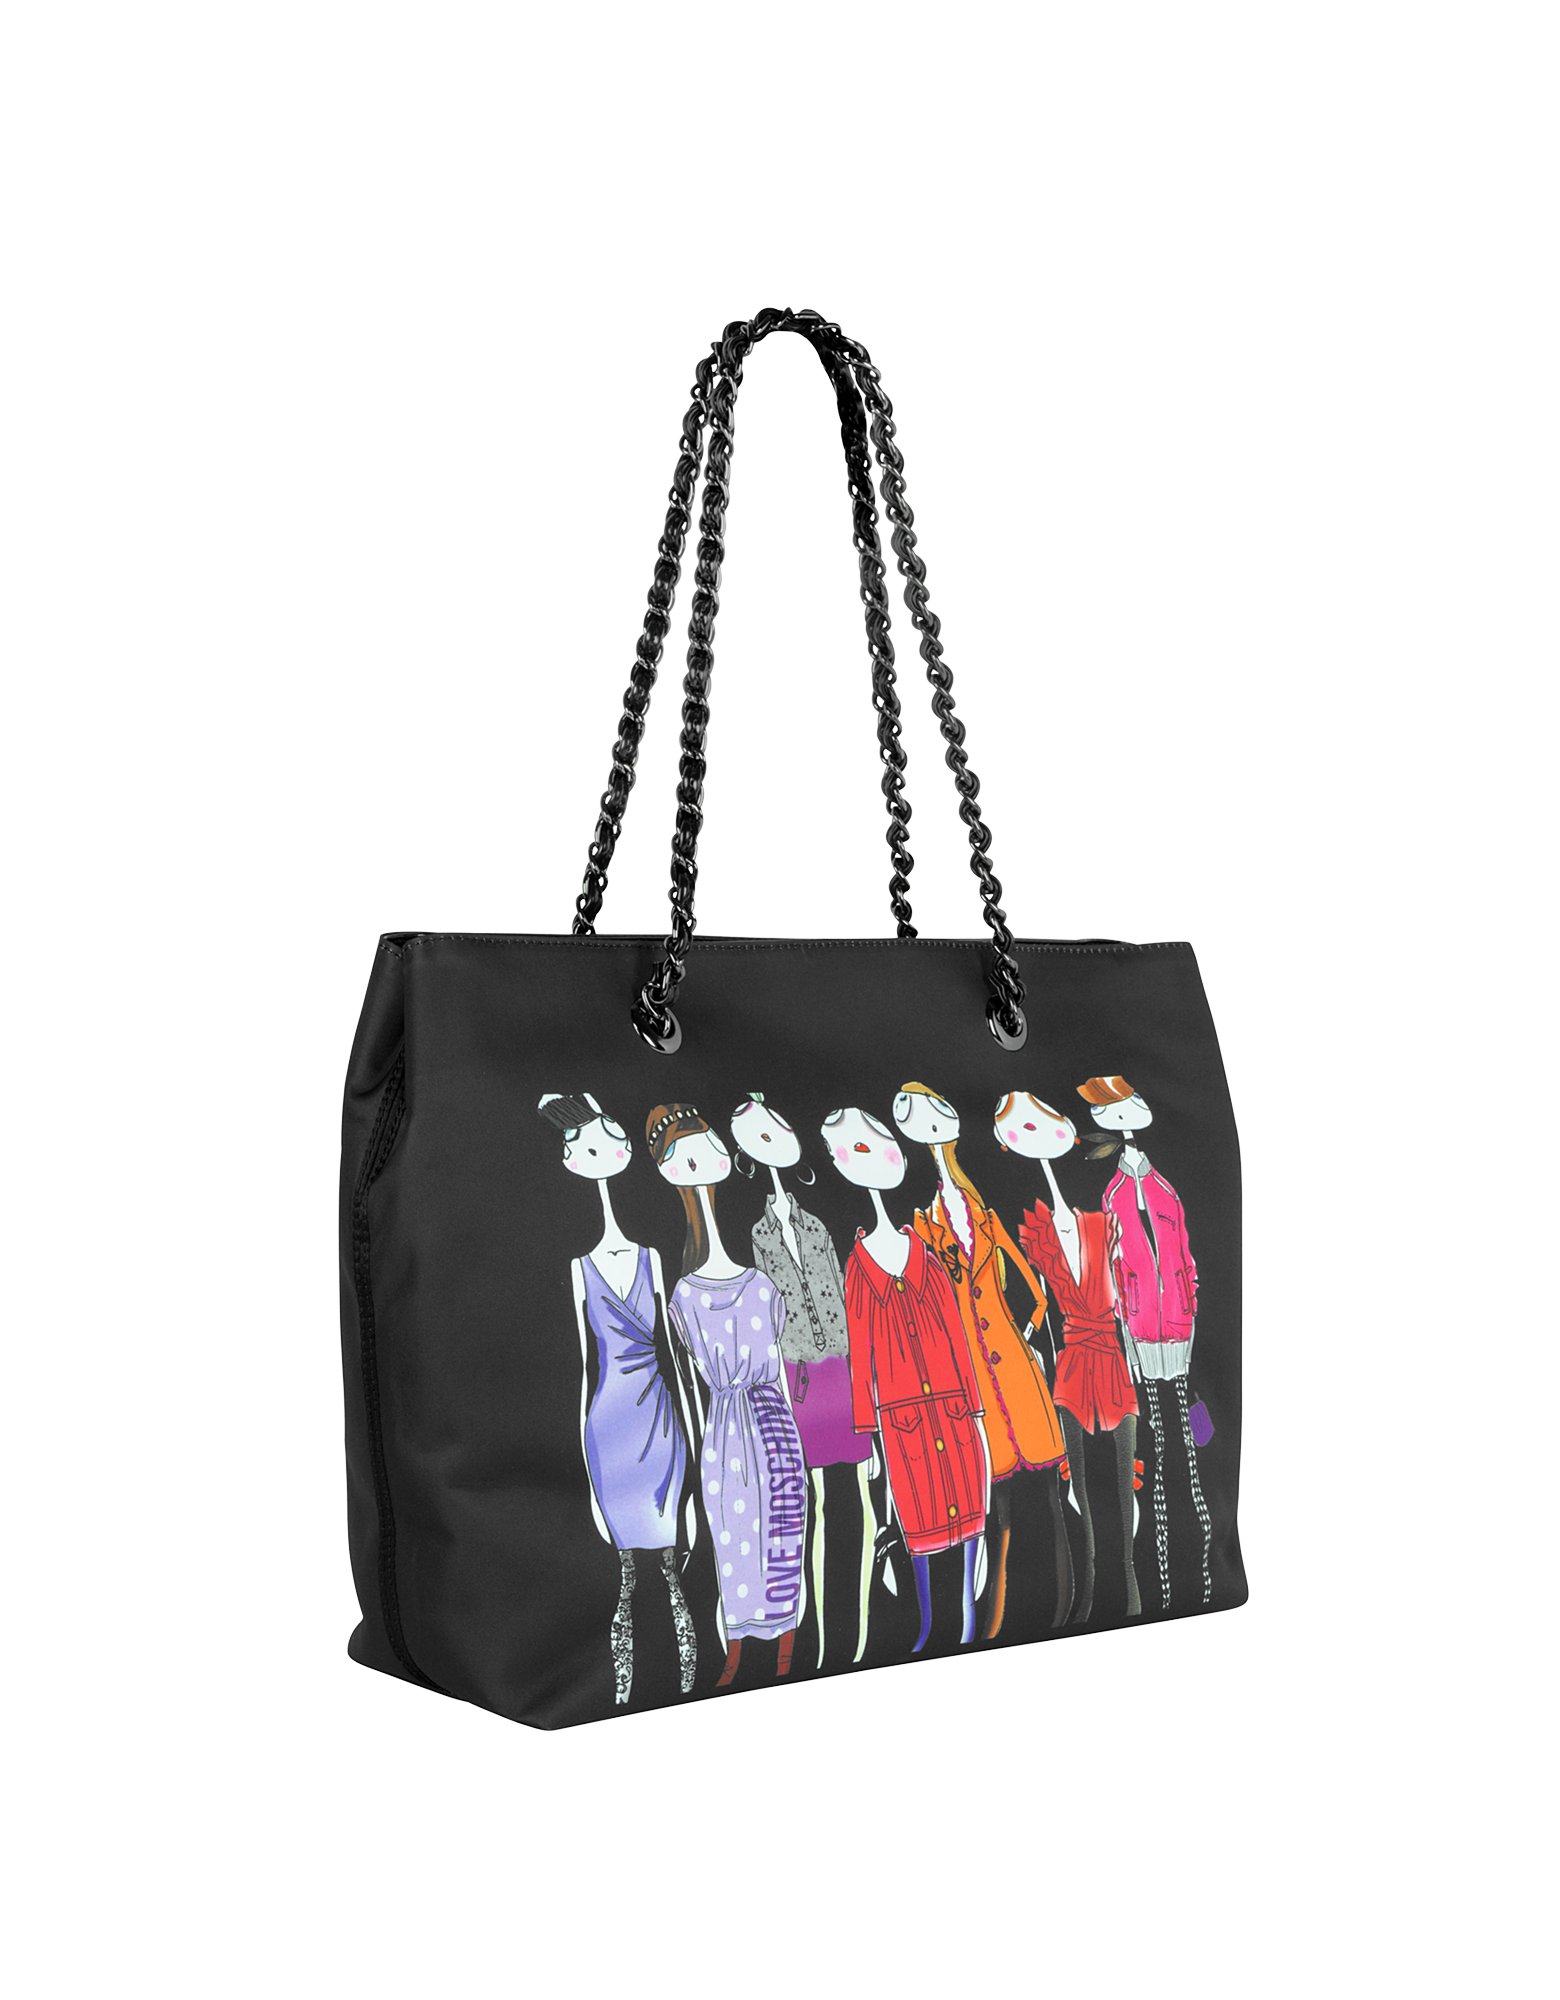 Lyst - Moschino Love Moschino Large Black Satin Tote Bag in Black